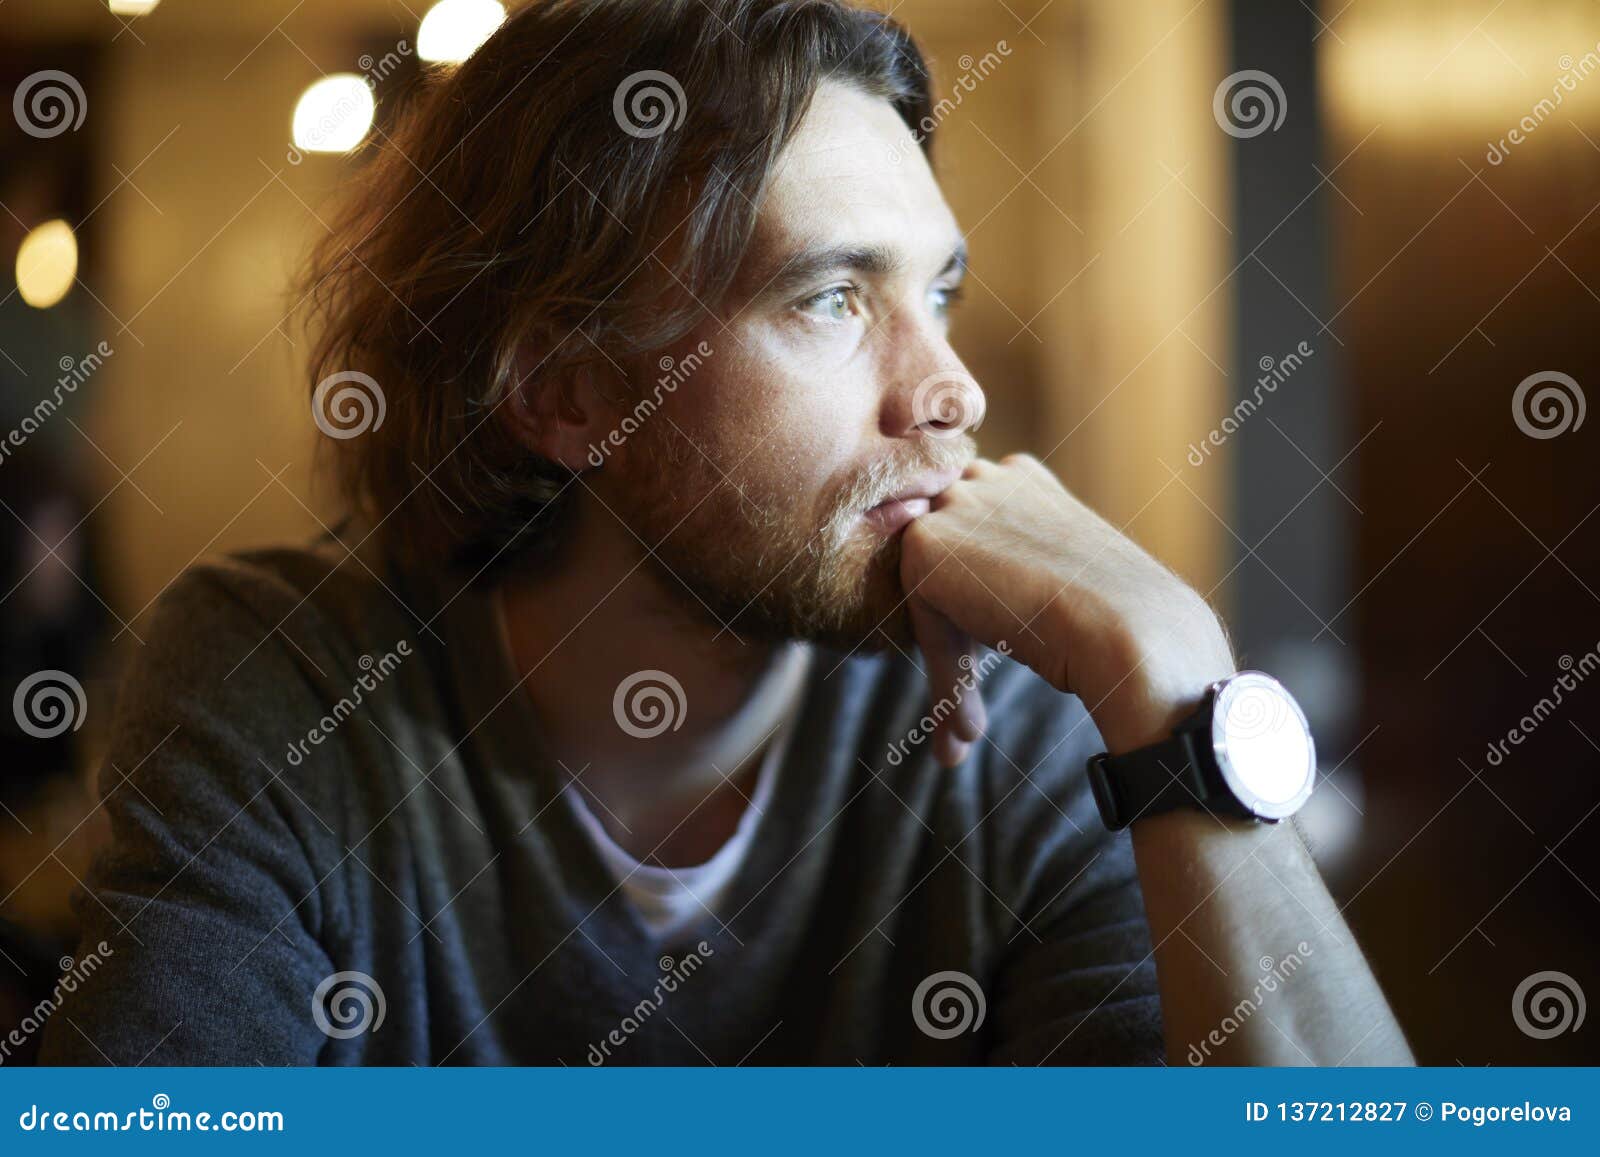 portrait of handsome hipster guy with long hair and beard sitting in sunny cafe, resting near window. romantic man looks lonely.